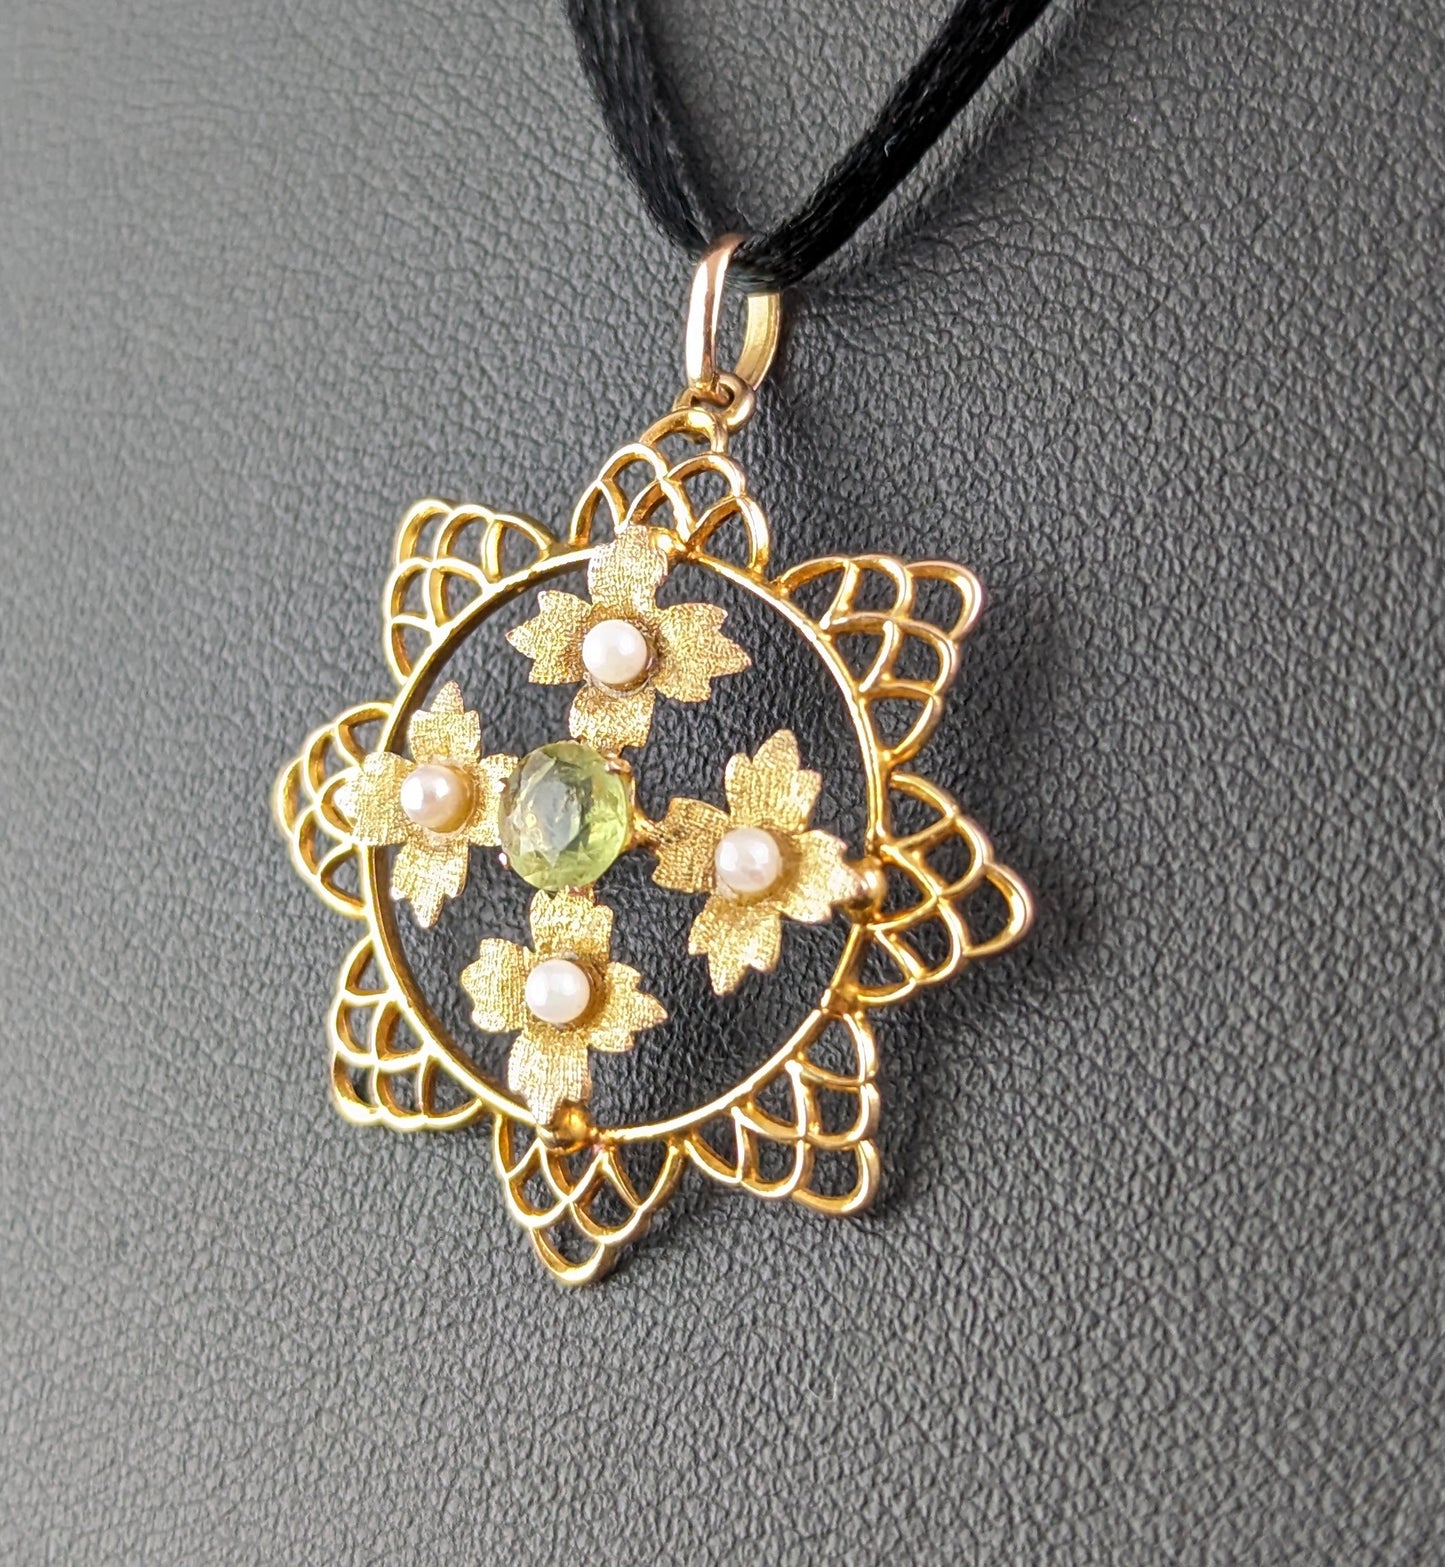 Antique Peridot and Pearl flower pendant, 9ct gold, Edwardian